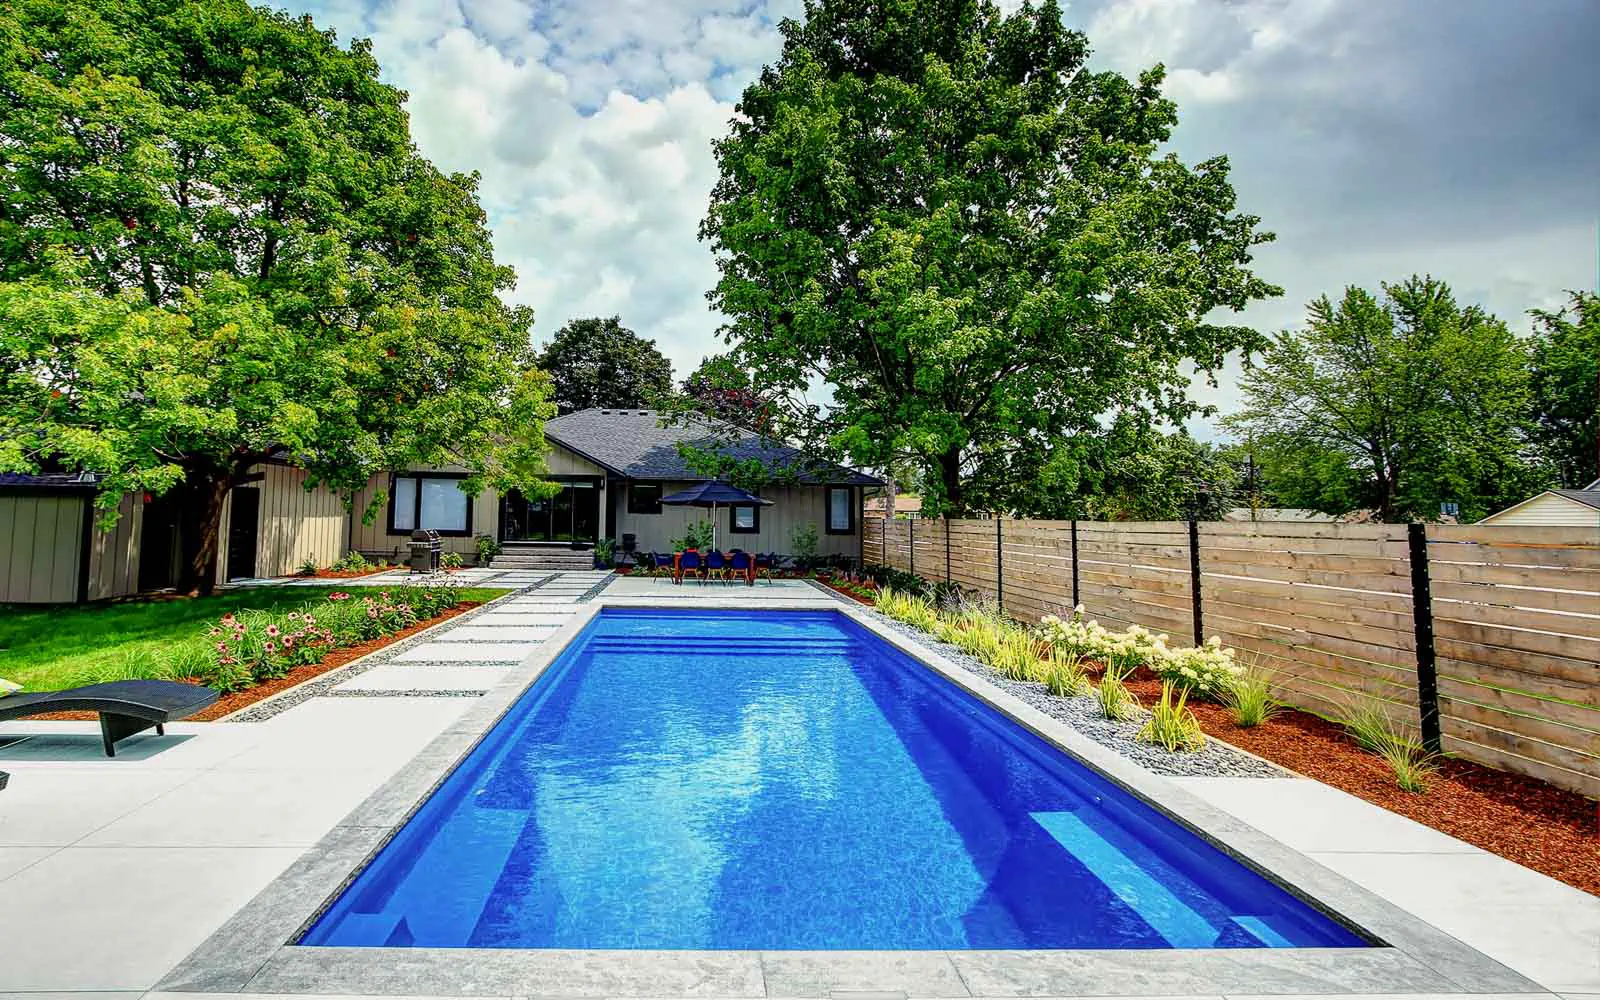 The Pinnacle, a fiberglass pool design manufactured by Leisure Pools